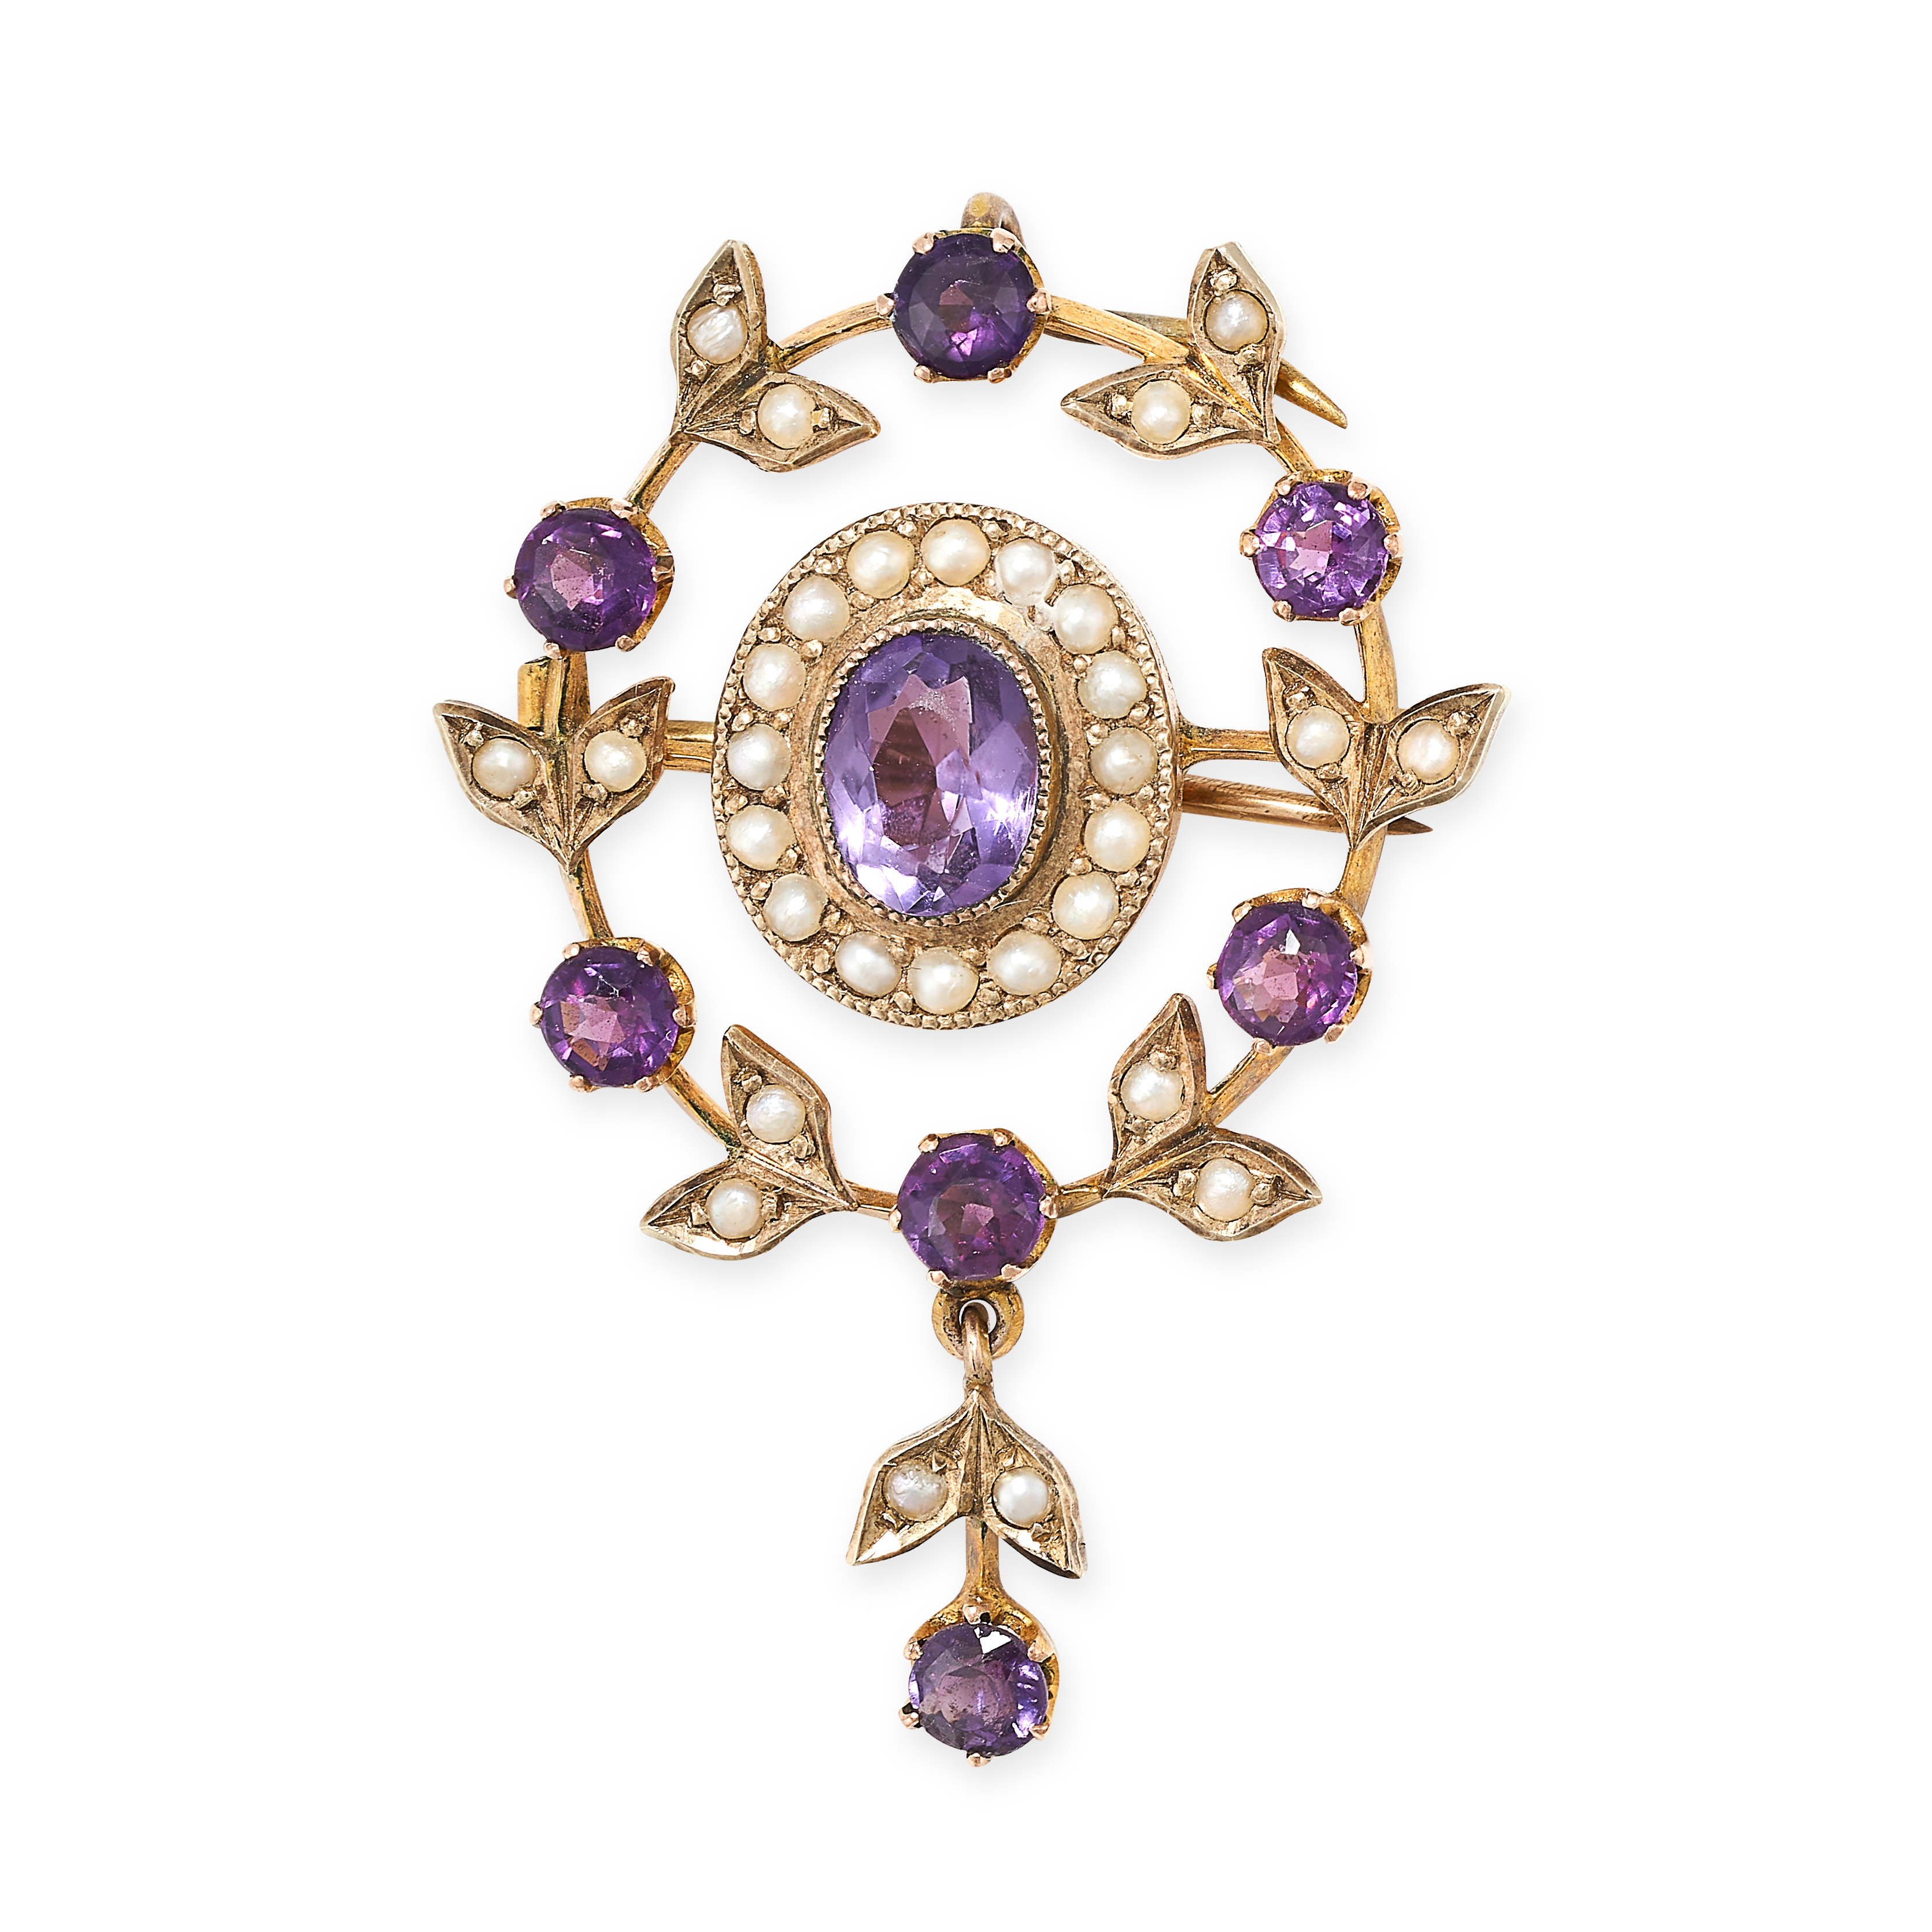 AN ANTIQUE EDWARDIAN AMETHYST AND PEARL PENDANT / BROOCH in 9ct yellow gold, set with an oval cut